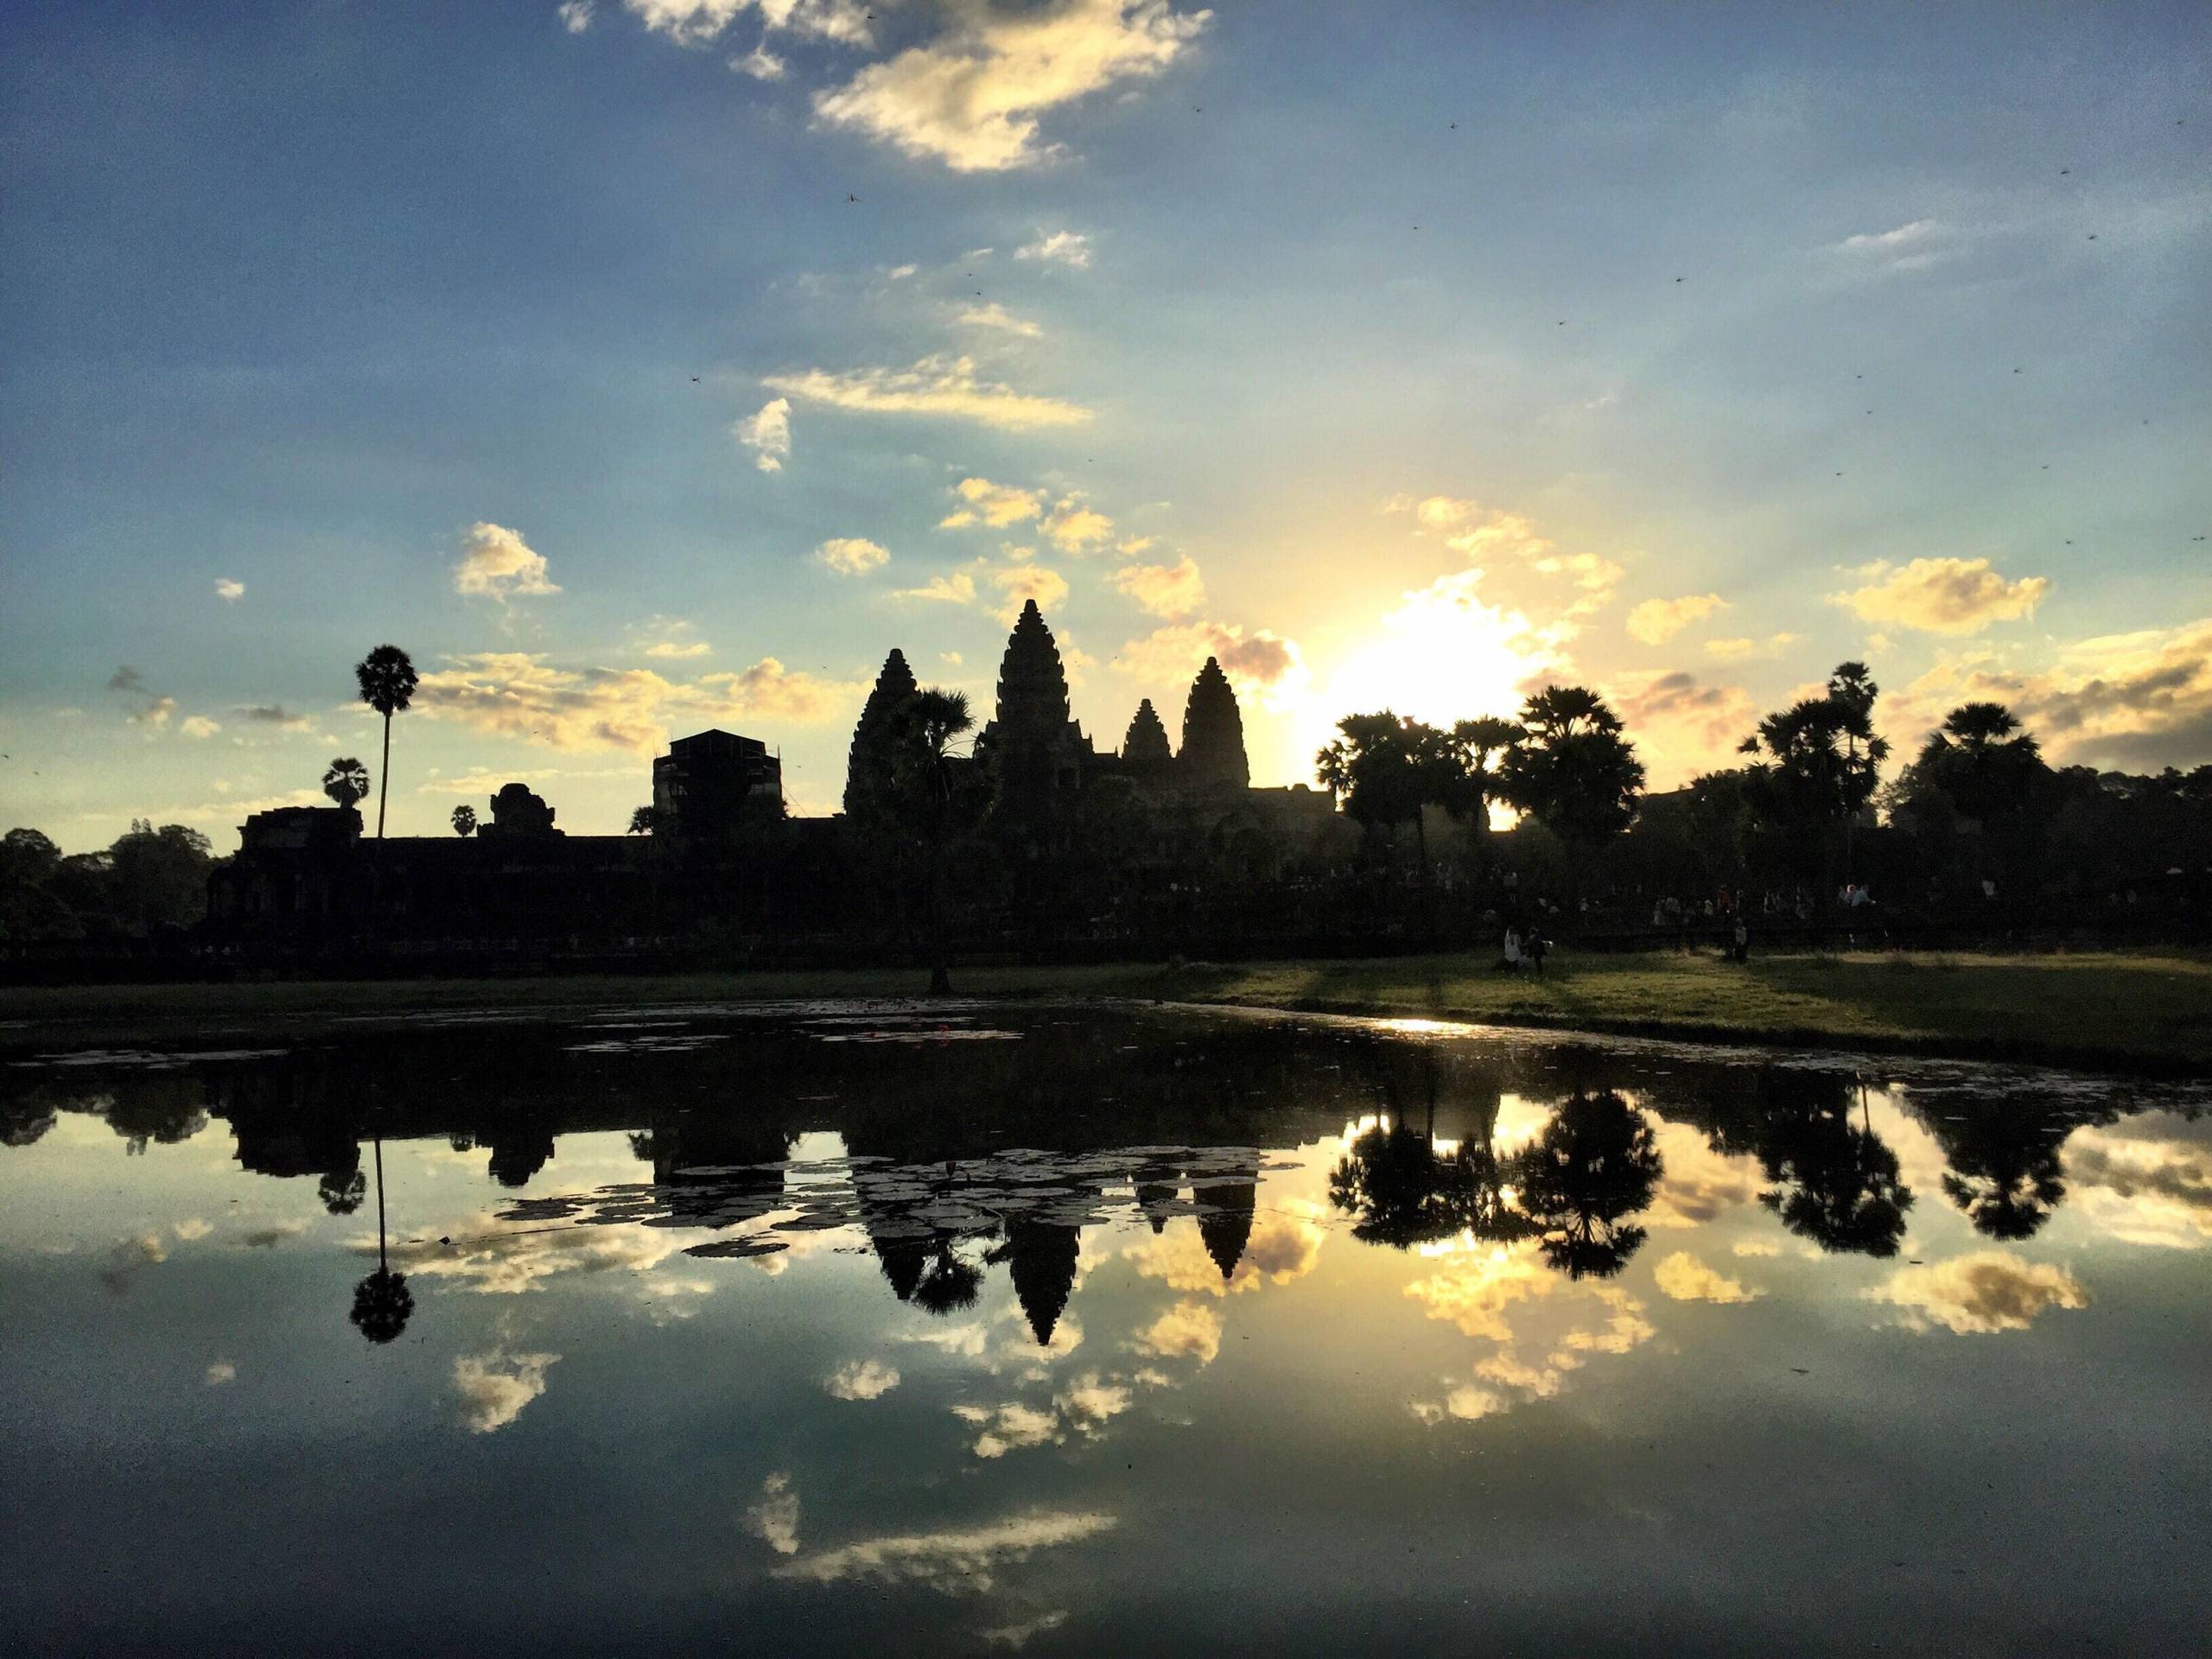 A photo of the sunrise at Angkor Wat in Siem Reap, Cambodia in January